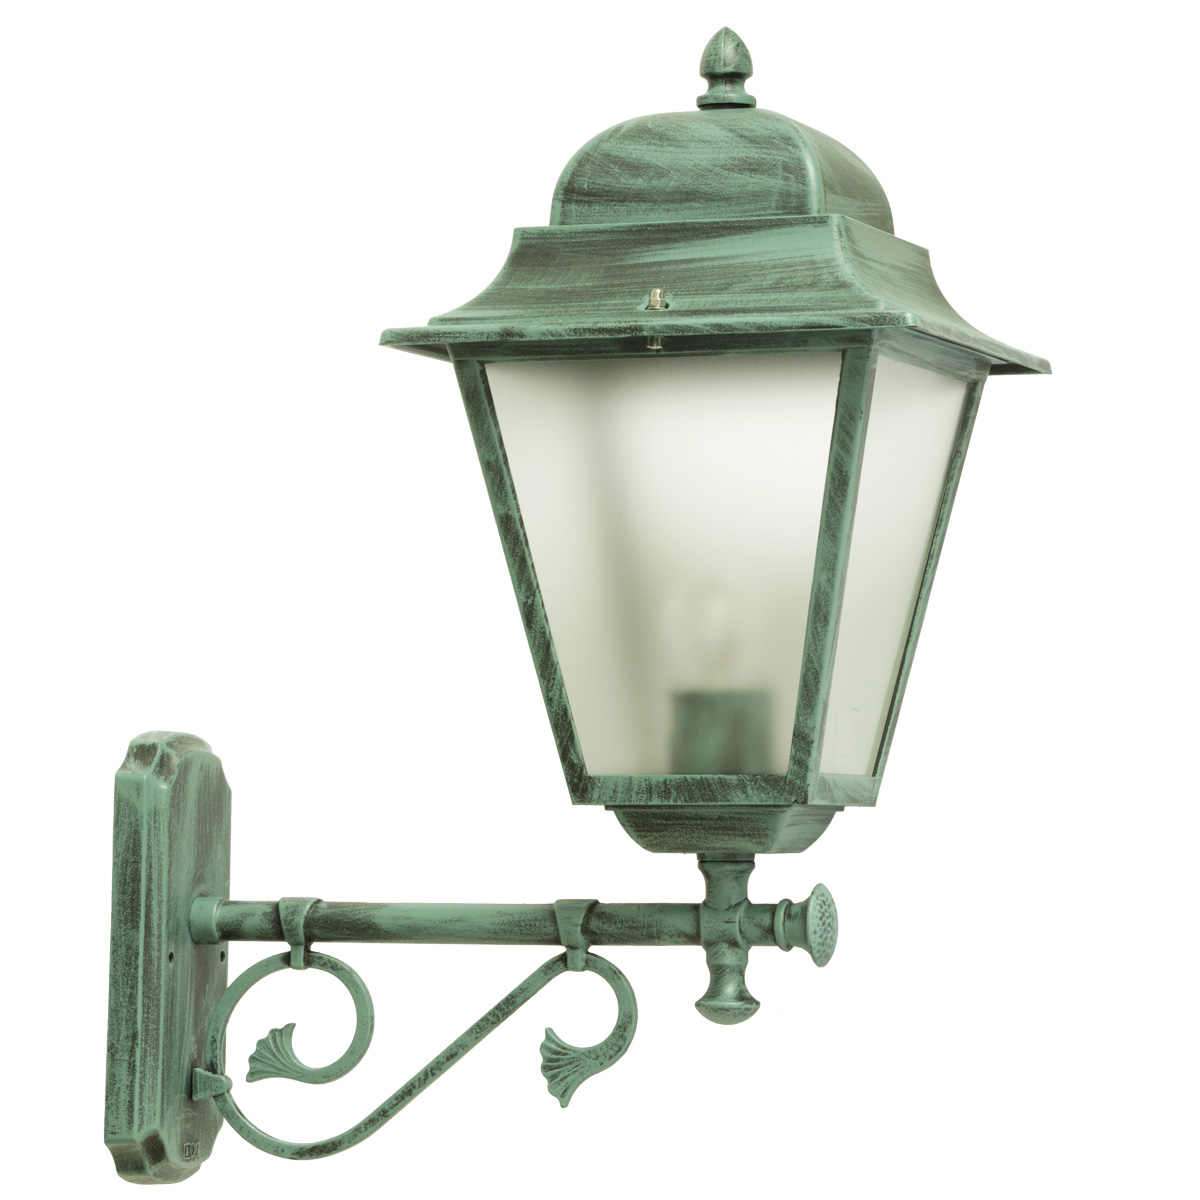 Classic Italian Wall Light for Outdoors